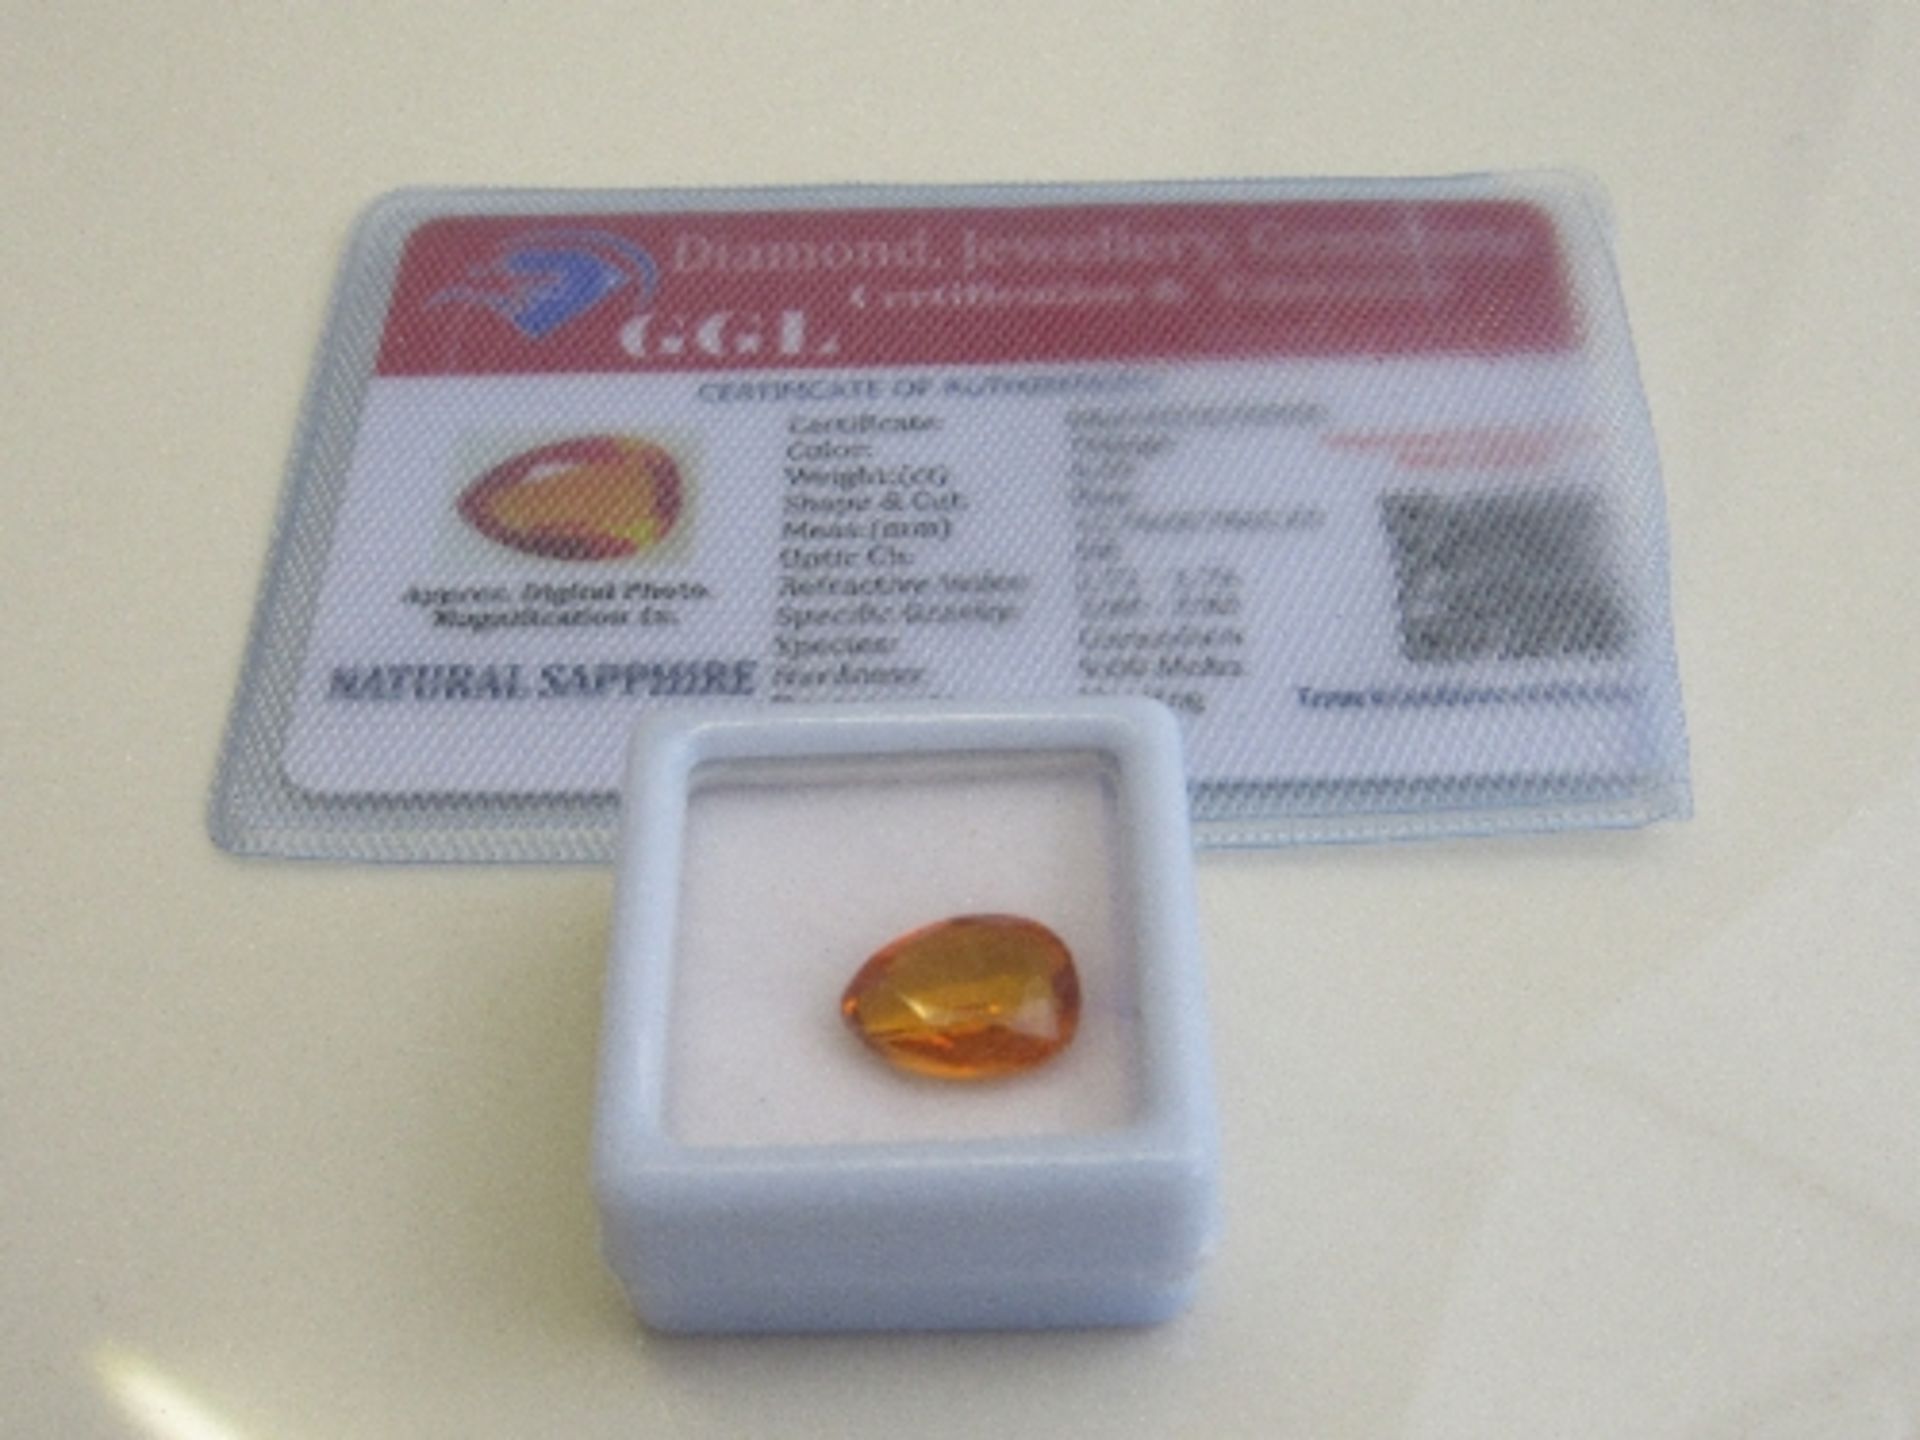 Natural pear cut loose sapphire, weight 6.20 carat, with certificate. Estimate £50-70.